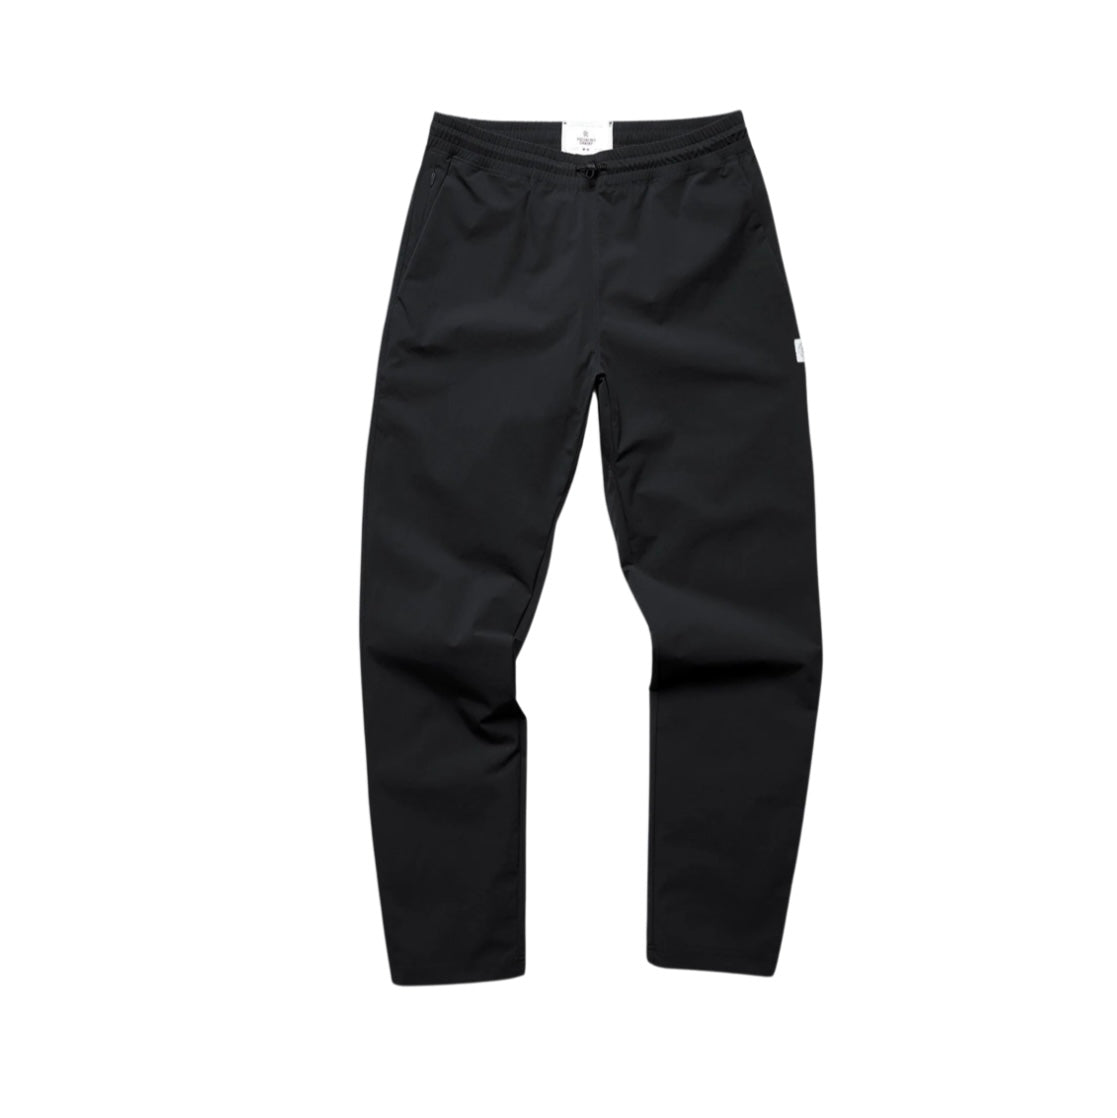 REIGNING CHAMP Field Pant